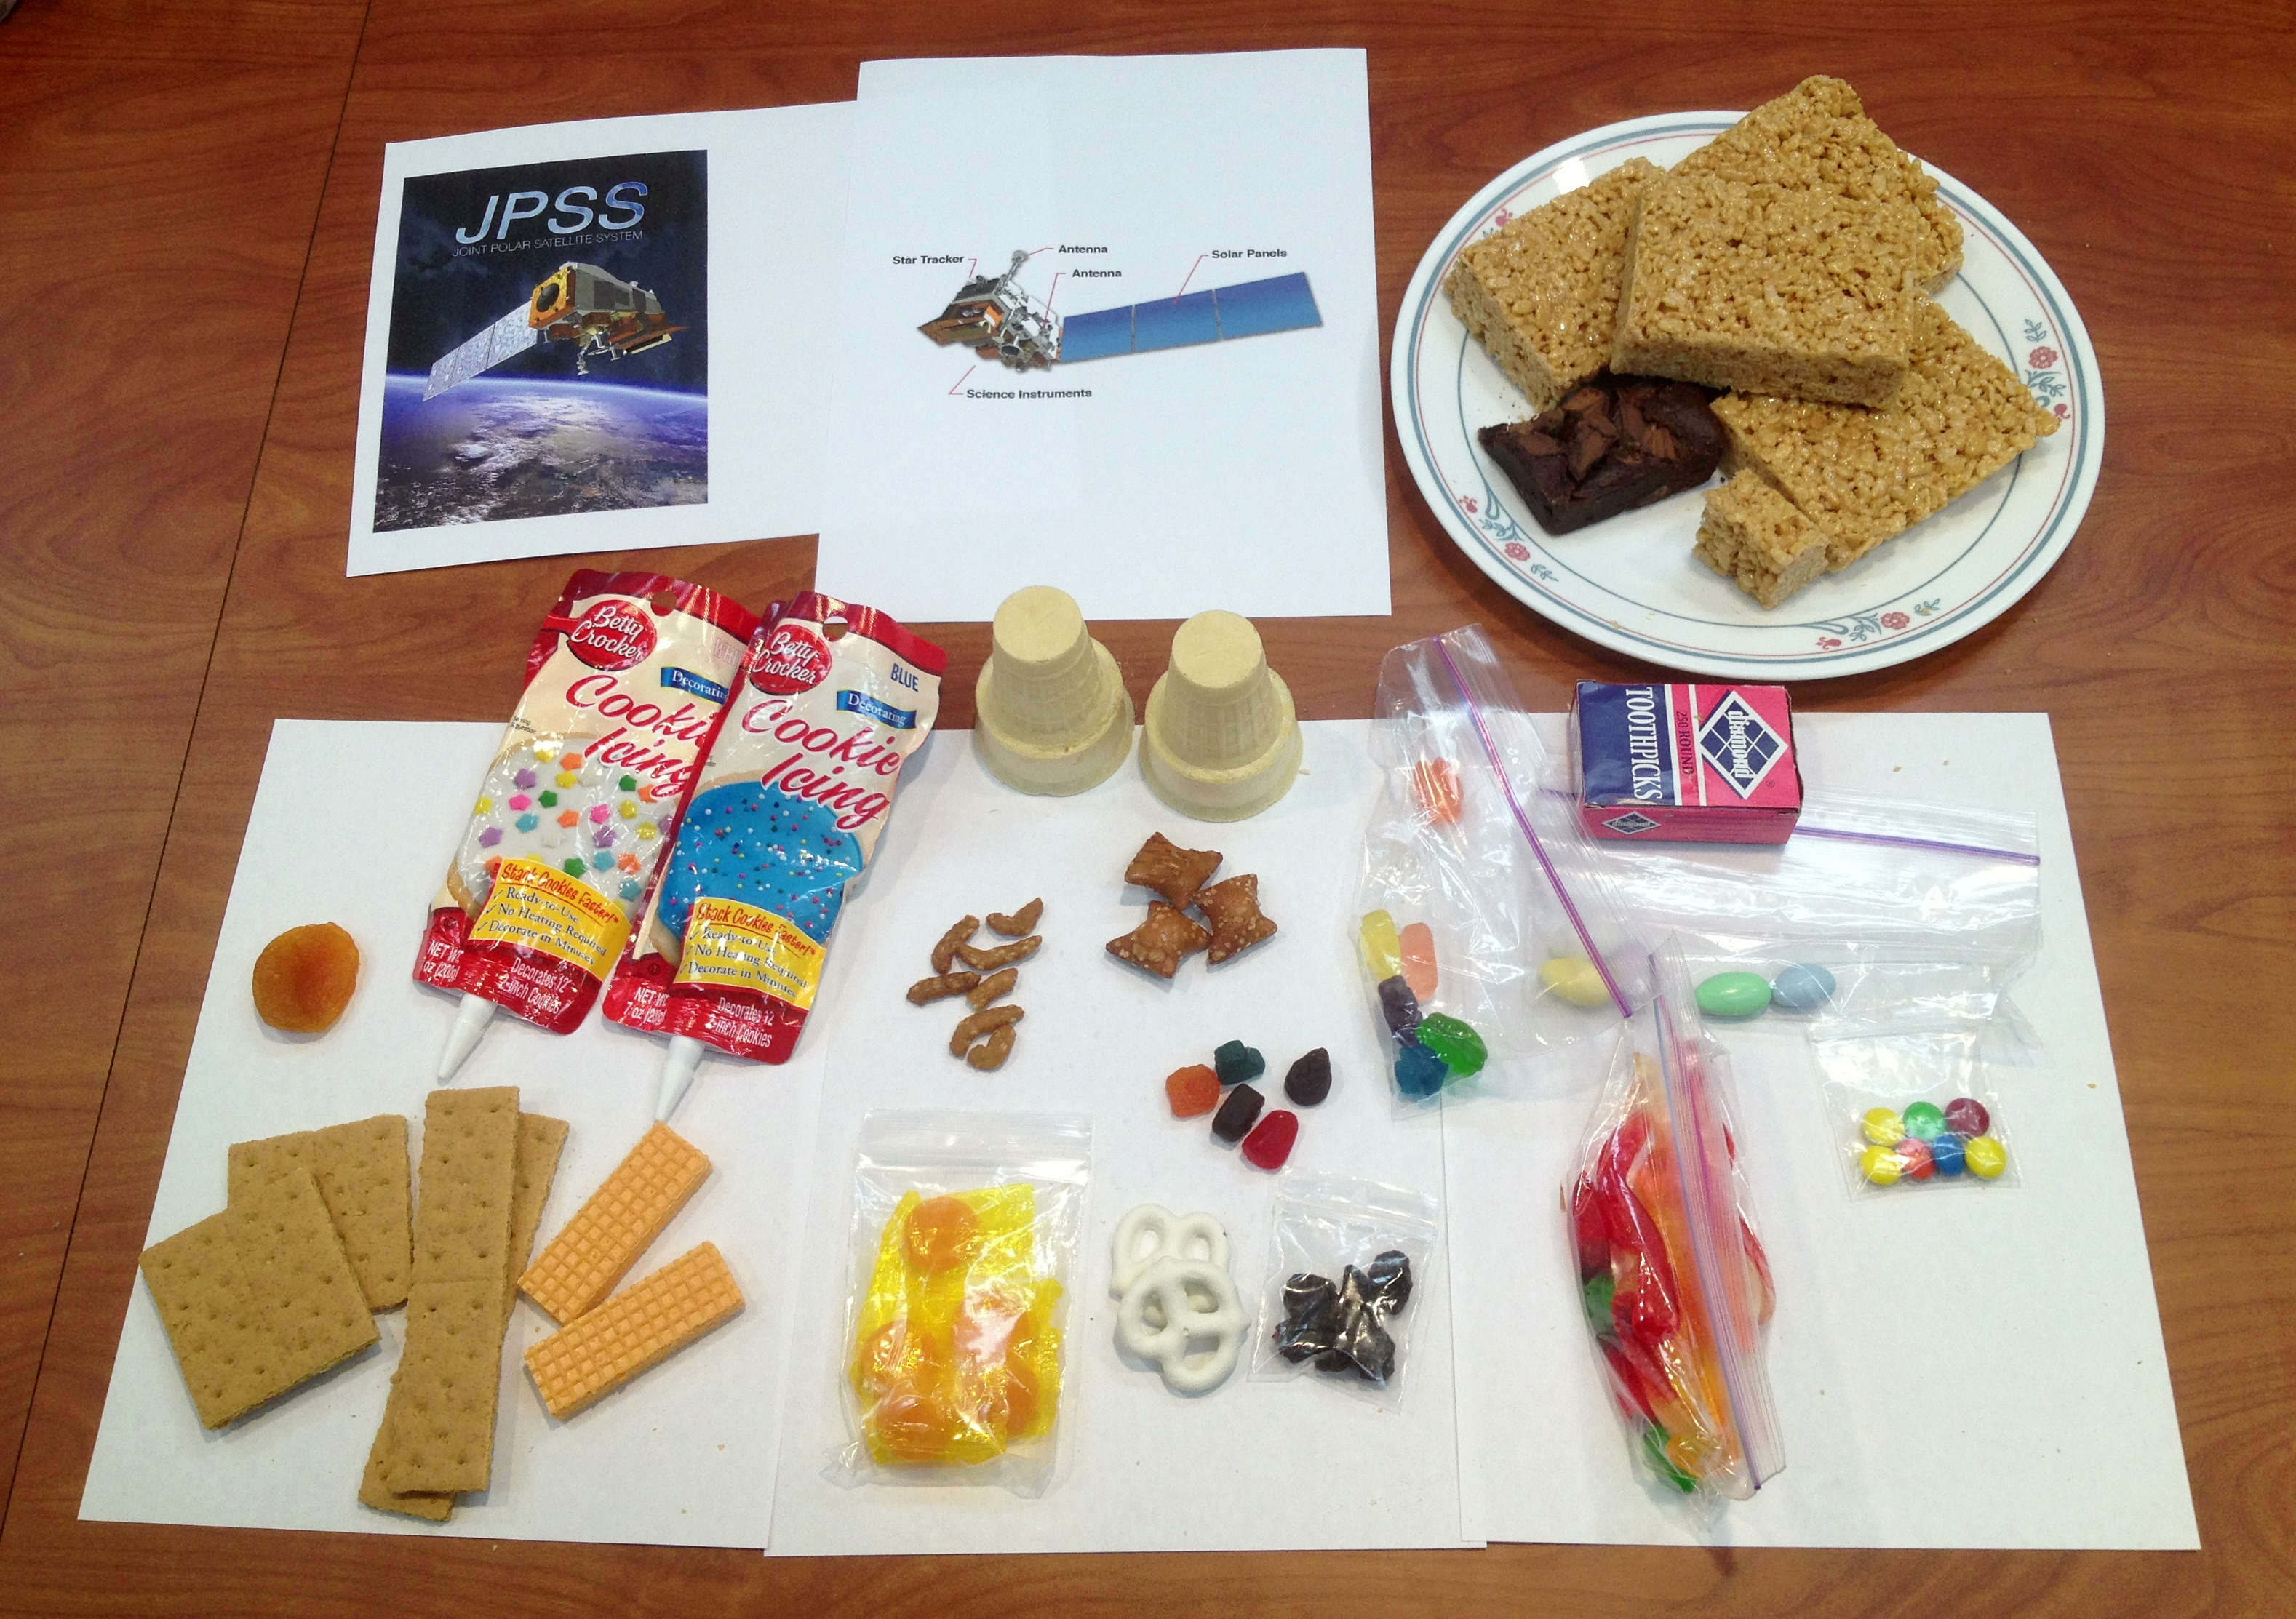 a picture of the described ingredients for an edible satellite model